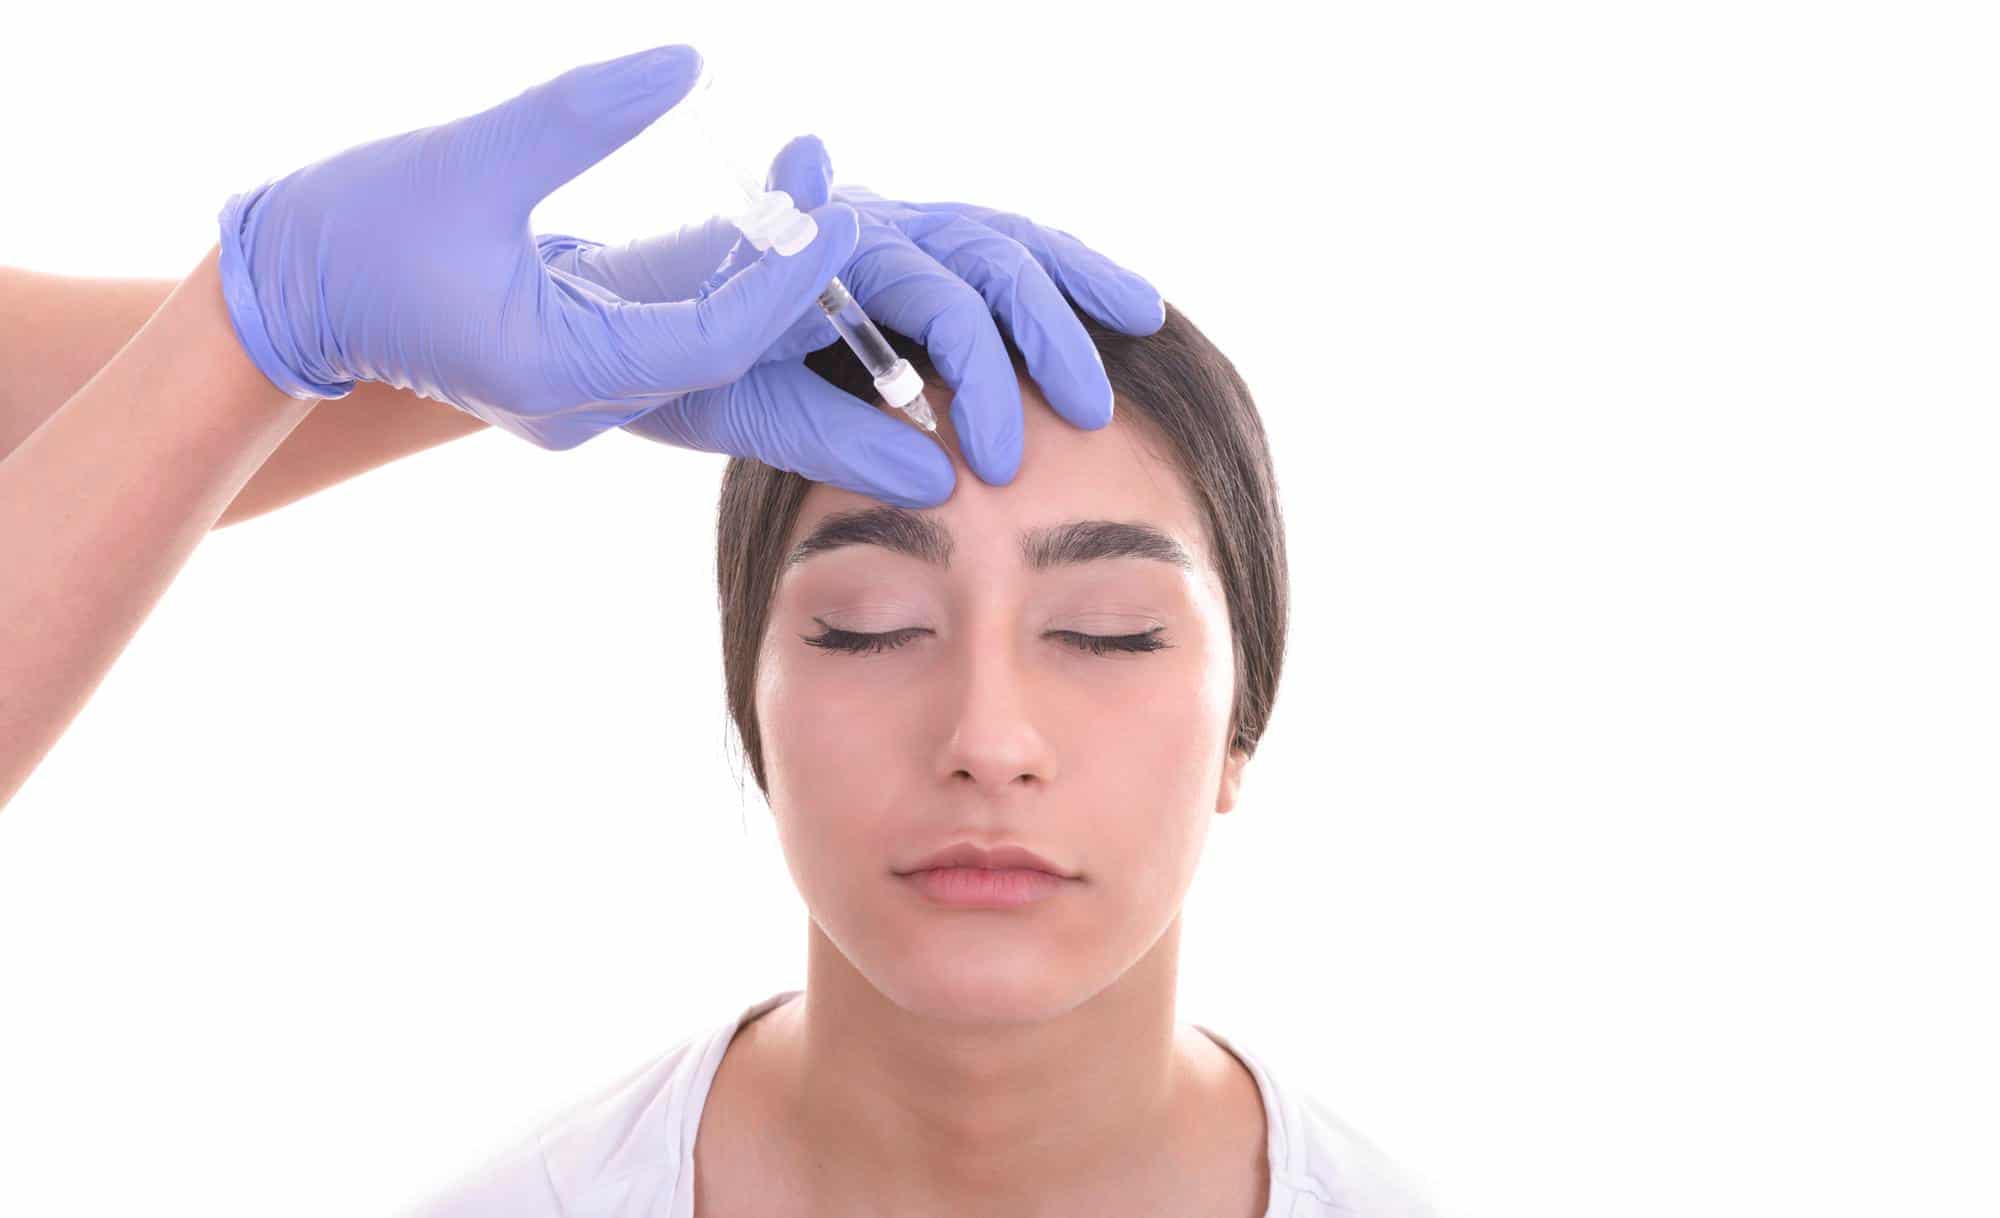 A patient receives Dysport treatment to relieve headaches.